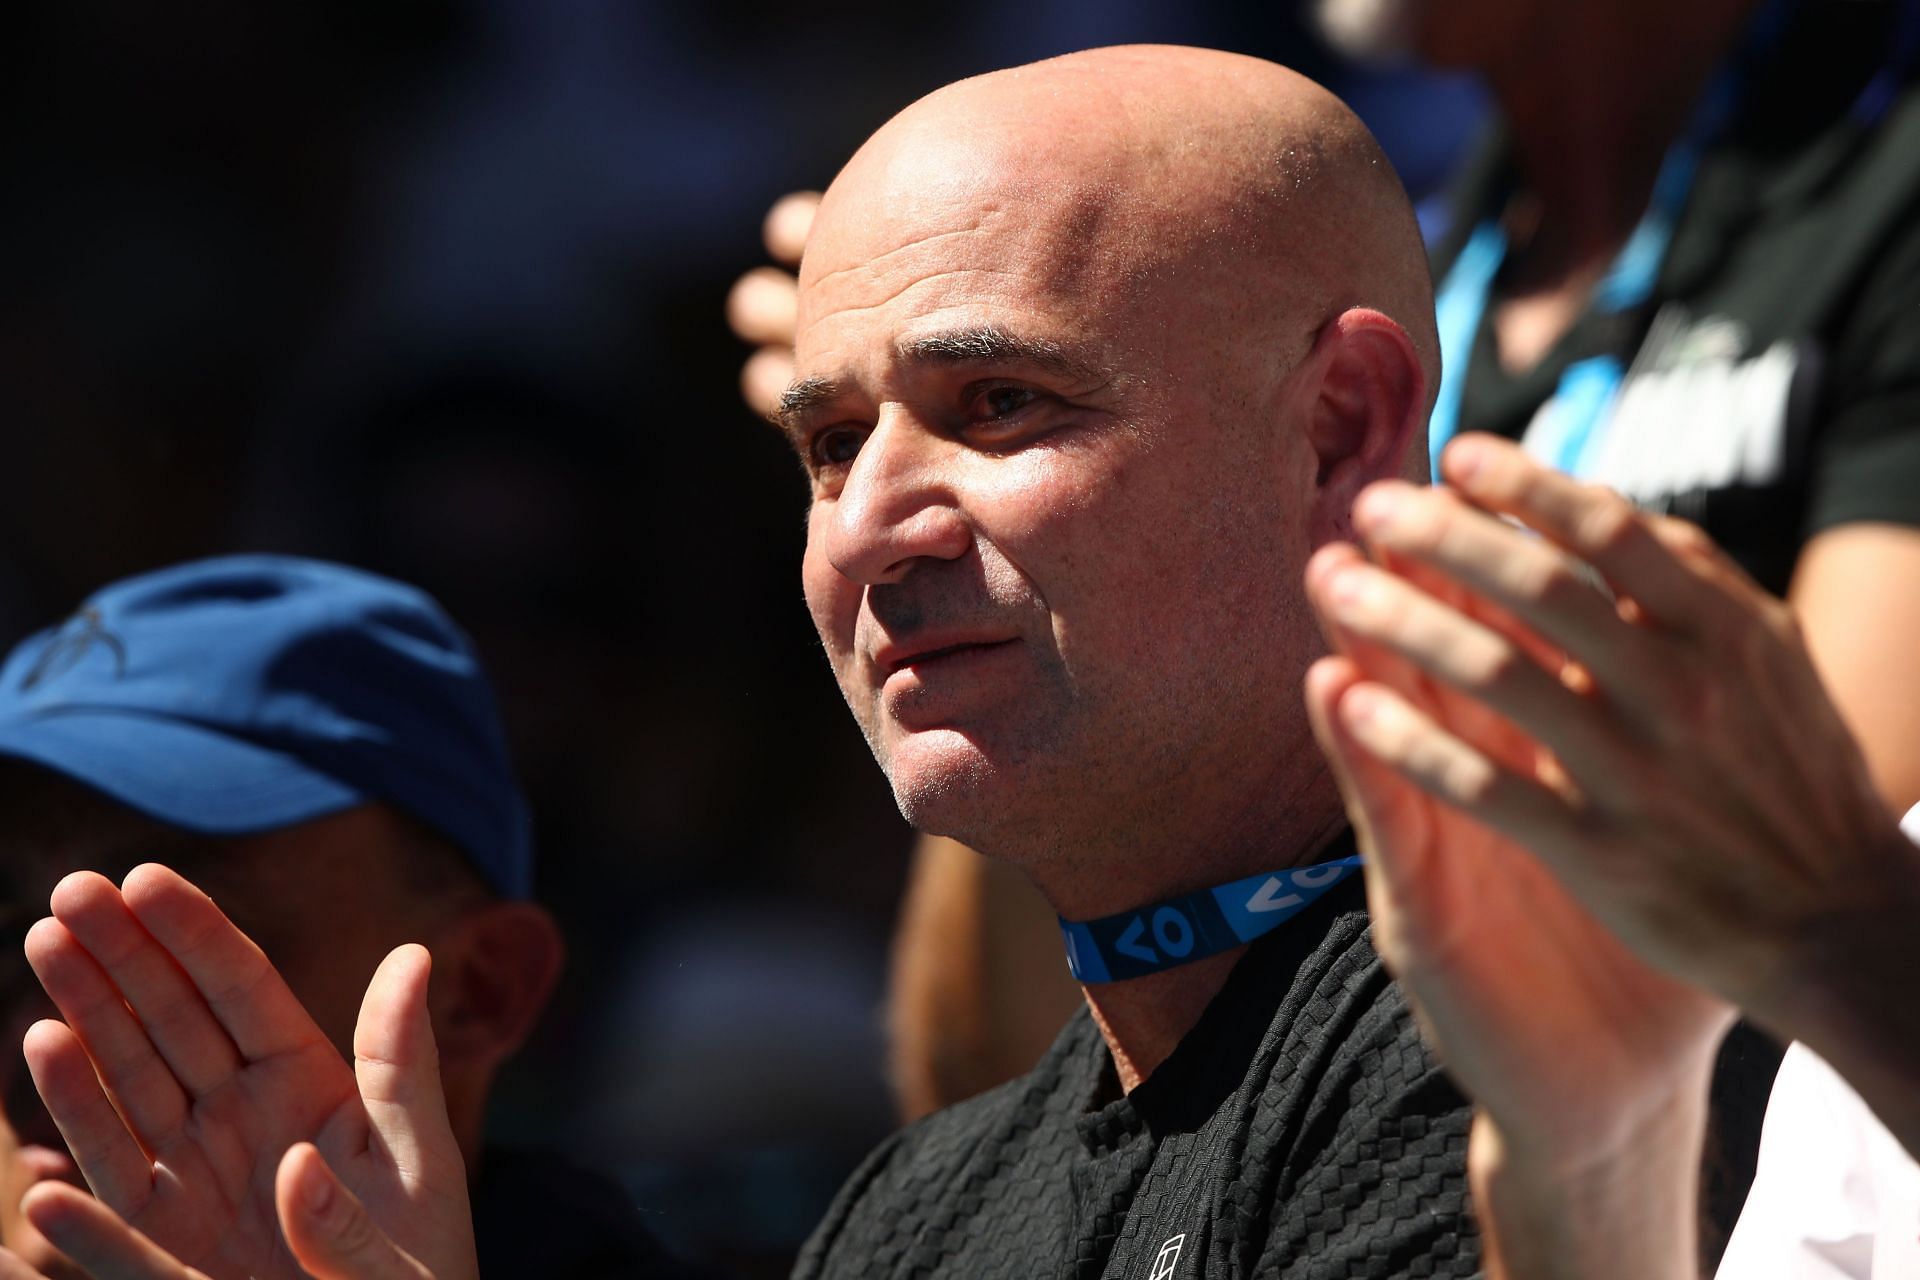 American tennis legend Andre Agassi retired from pro tennis in 2006.